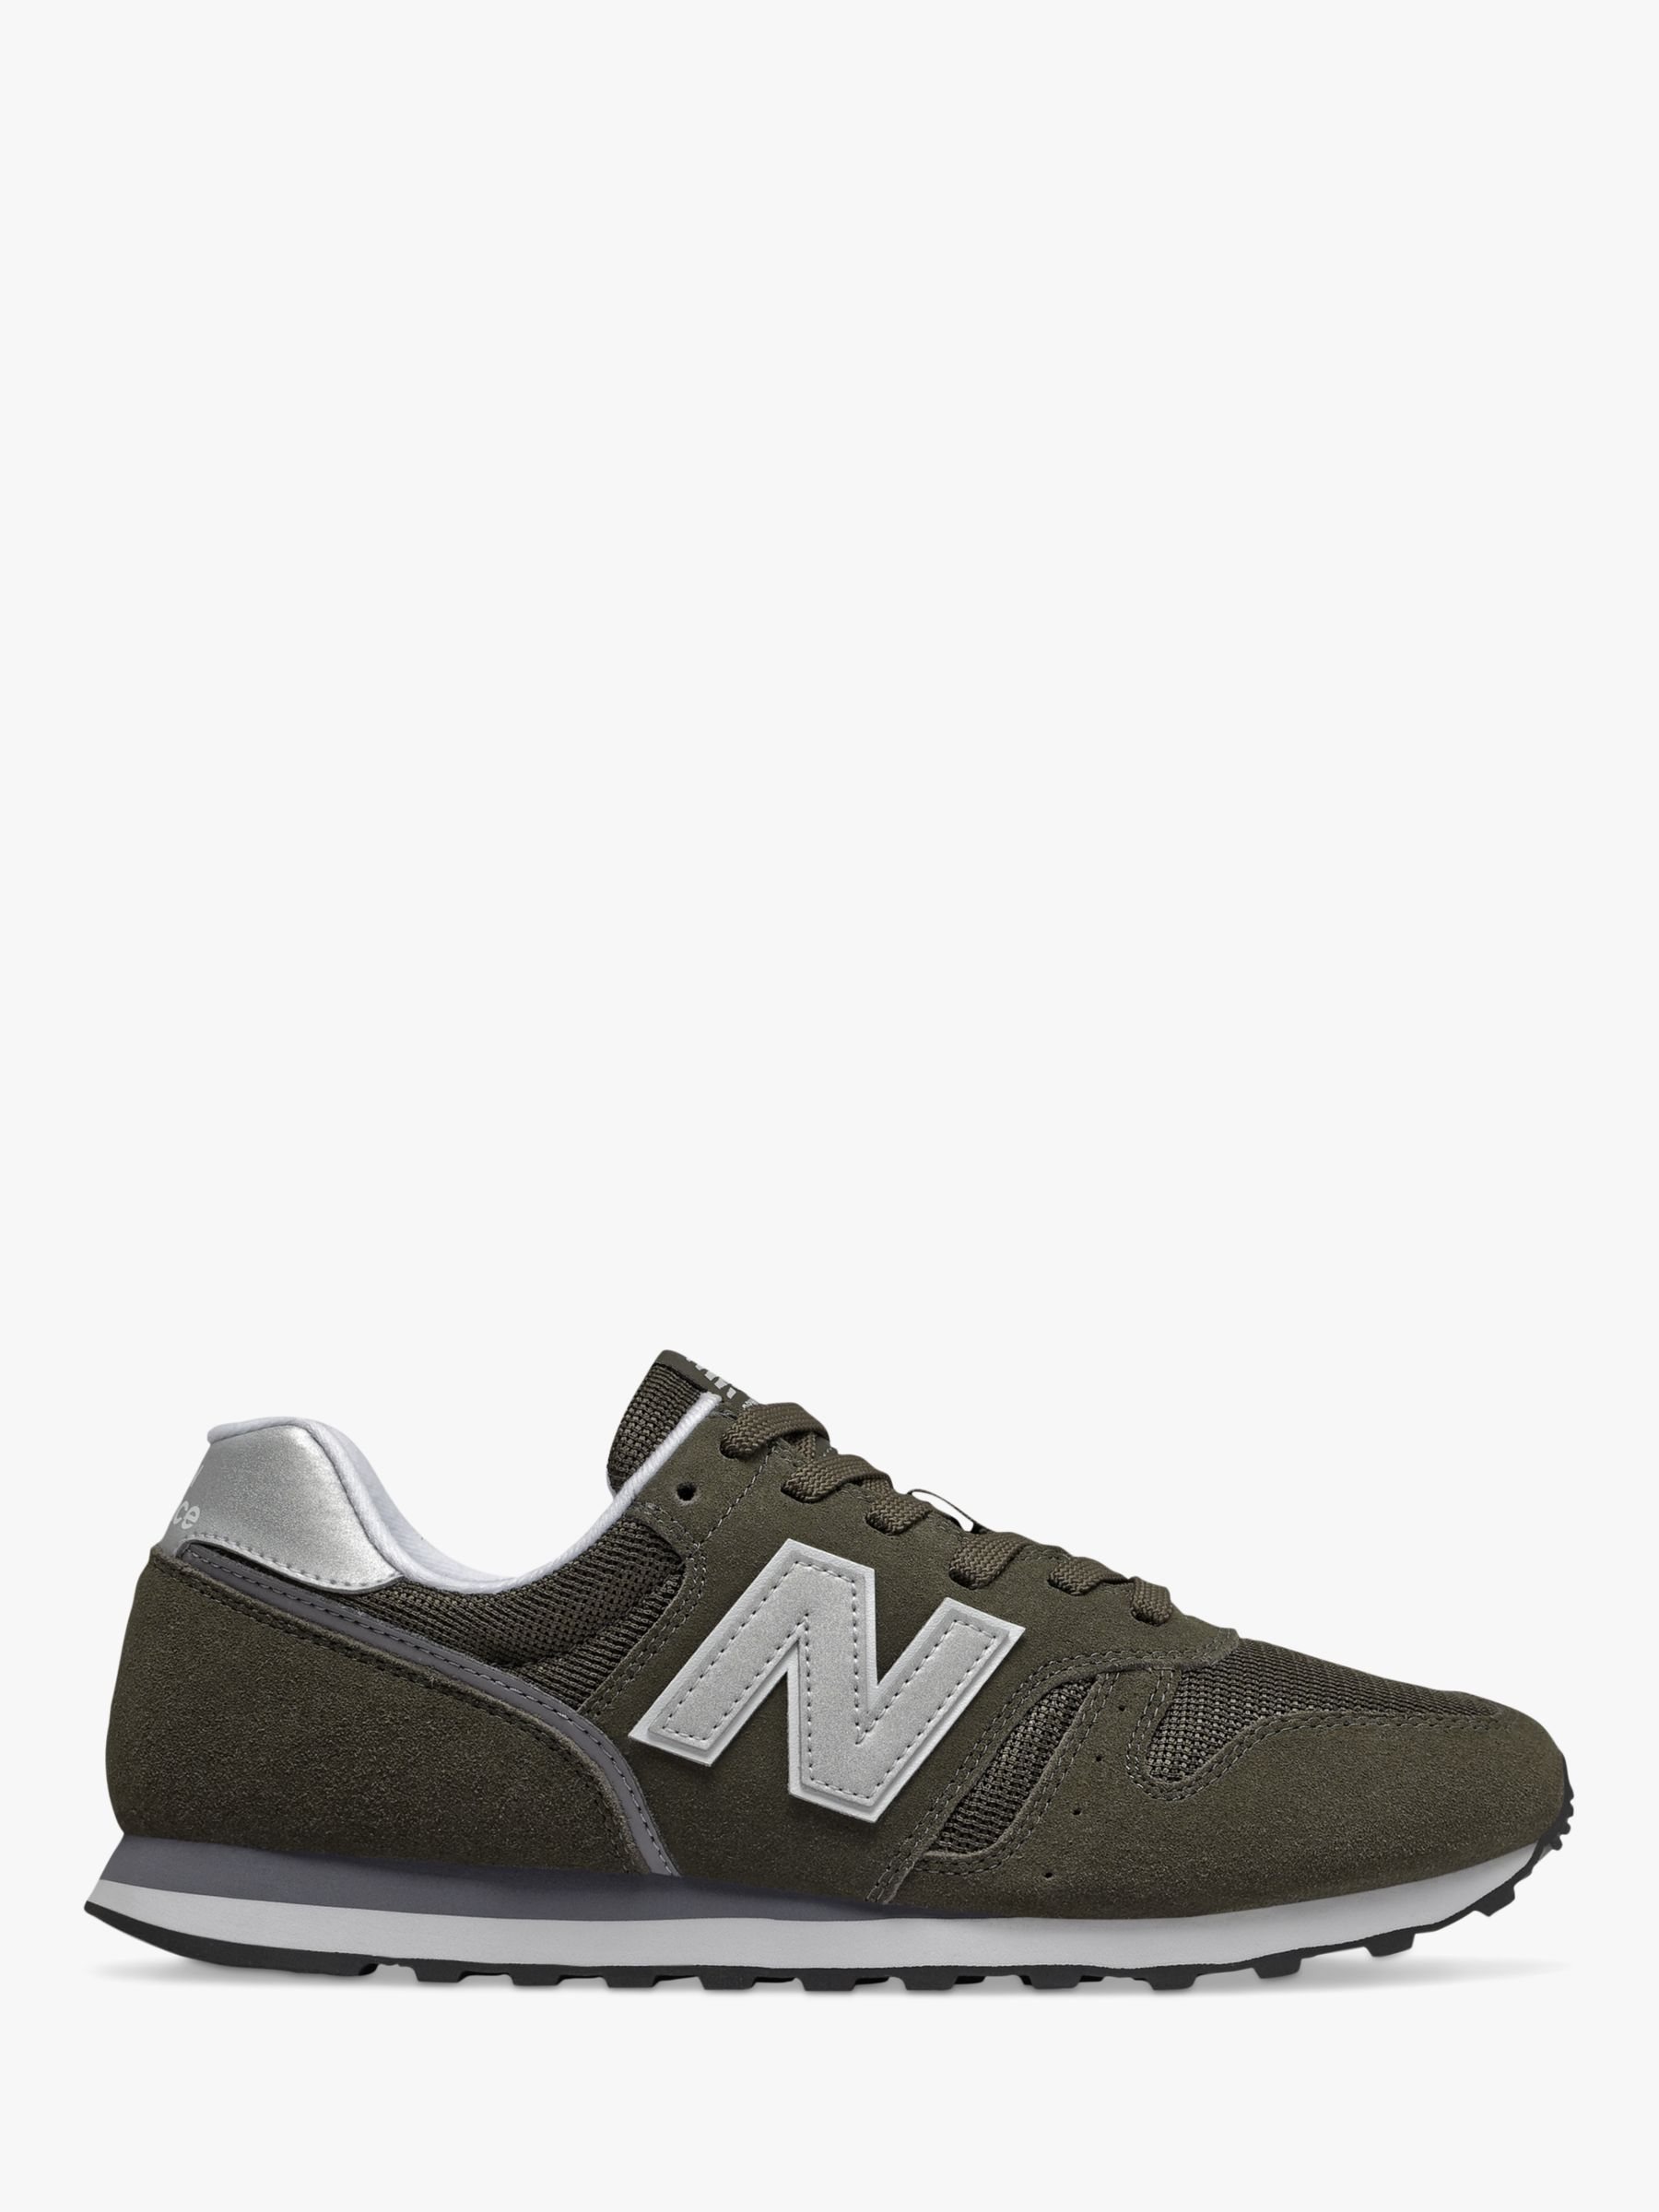 New Balance 373 V2 Trainers, Olive at John Lewis & Partners